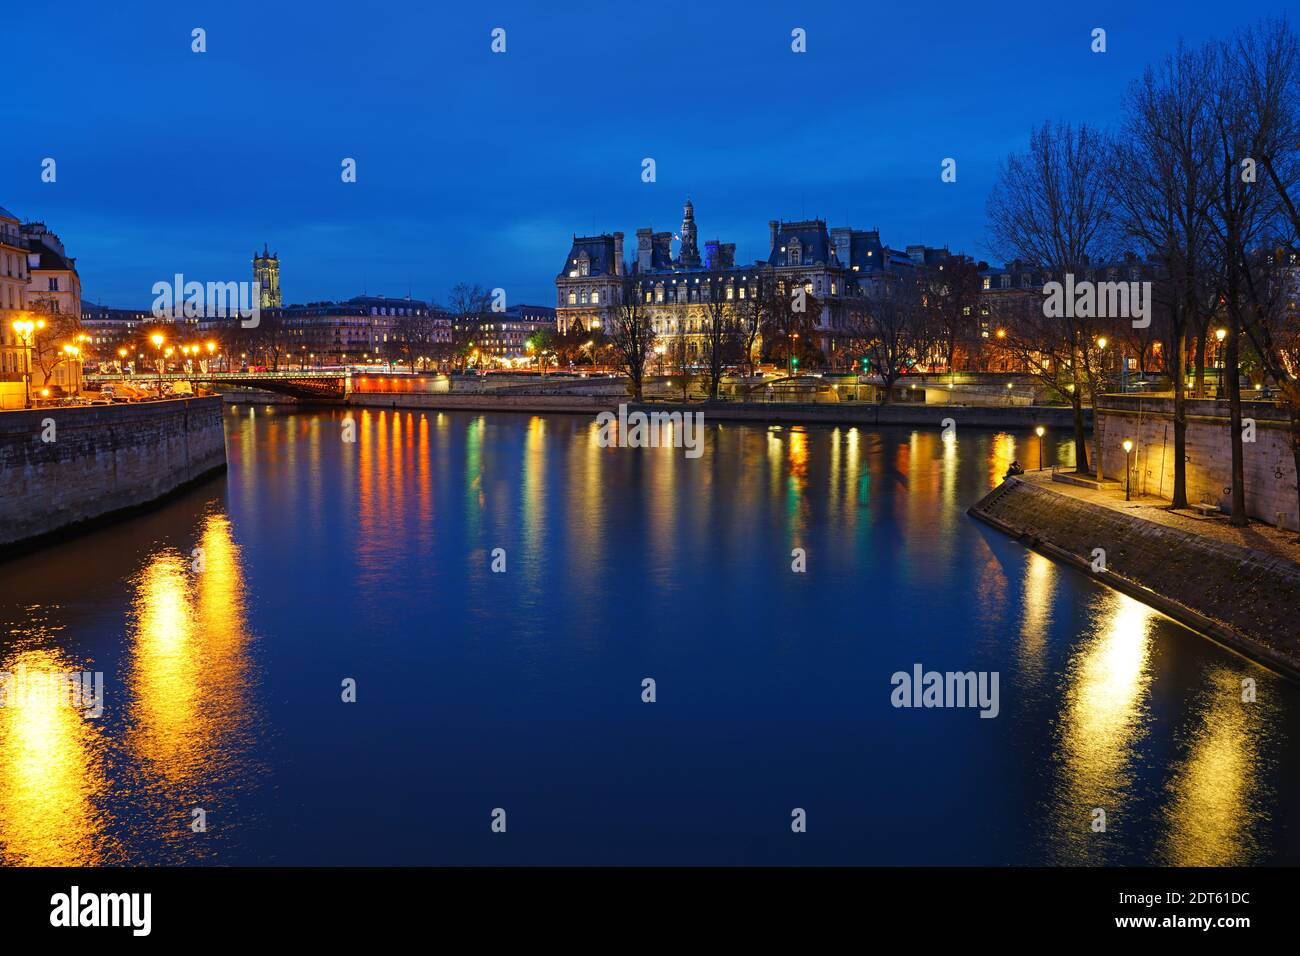 PARIS, FRANCE -16 DEC 2020- Night view of the Hotel de Ville (City Hall housing the office of the mayor (Anne Hidalgo) and local administration of Par Stock Photo